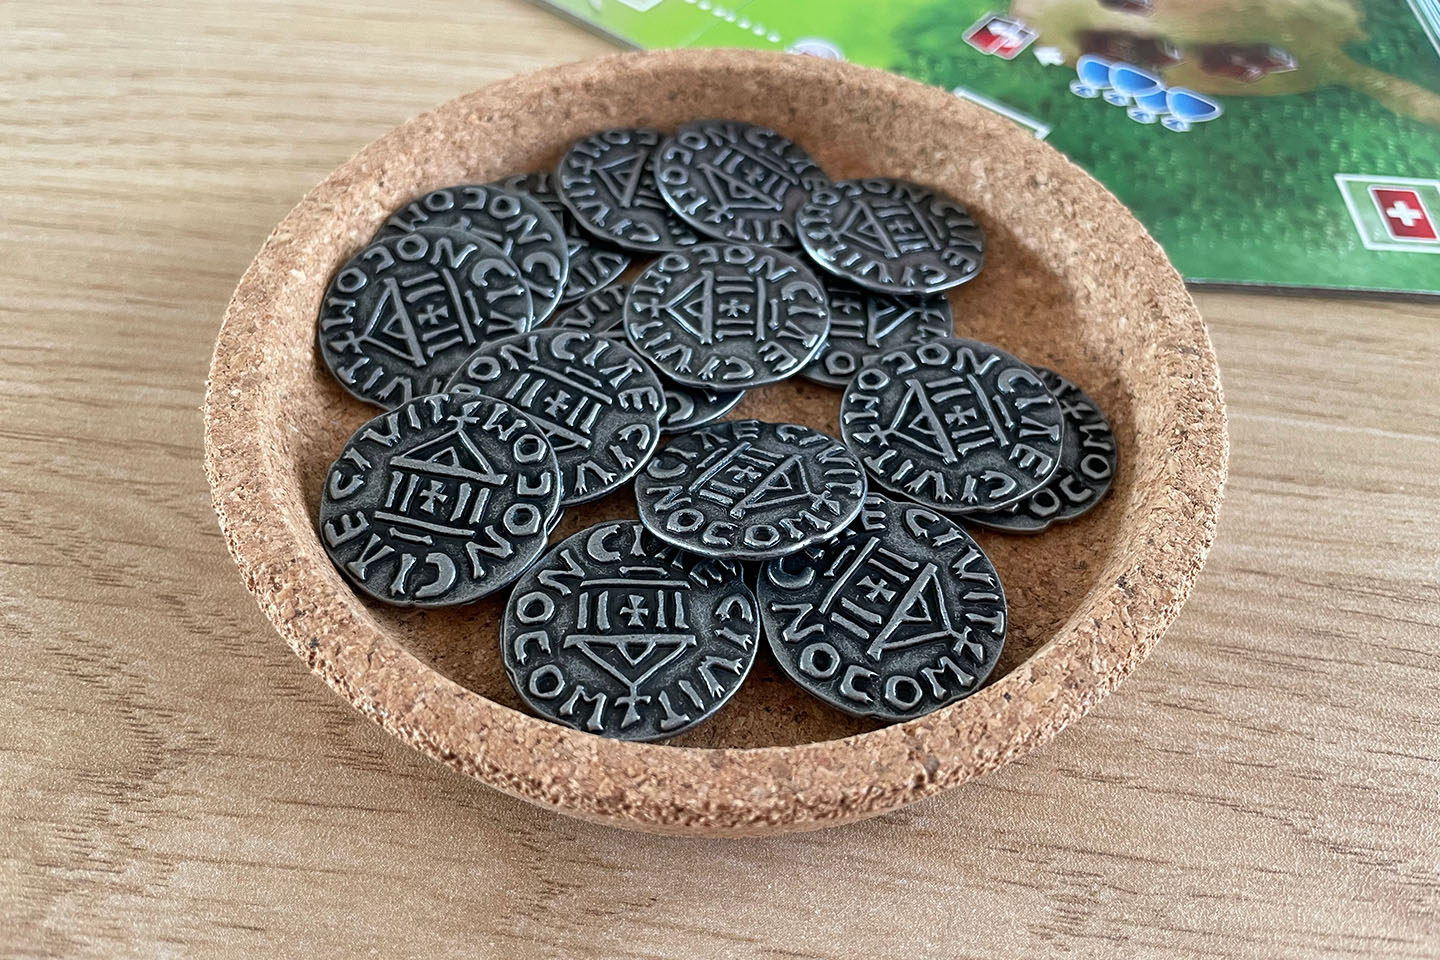 The official metal coins for the West Kingdom games.